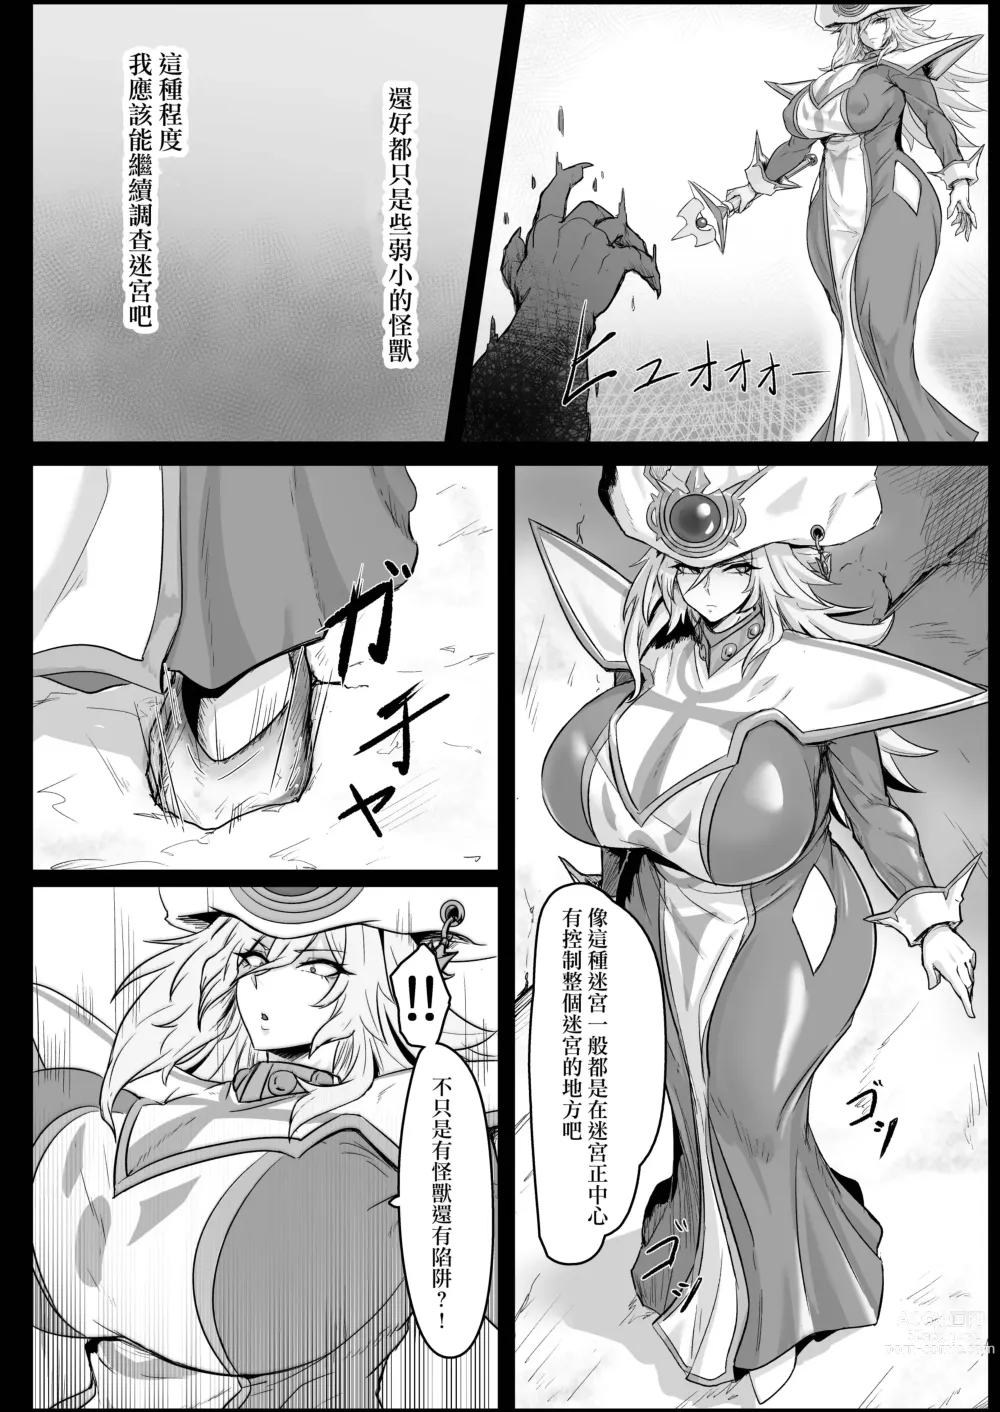 Page 6 of doujinshi Direct Attack!